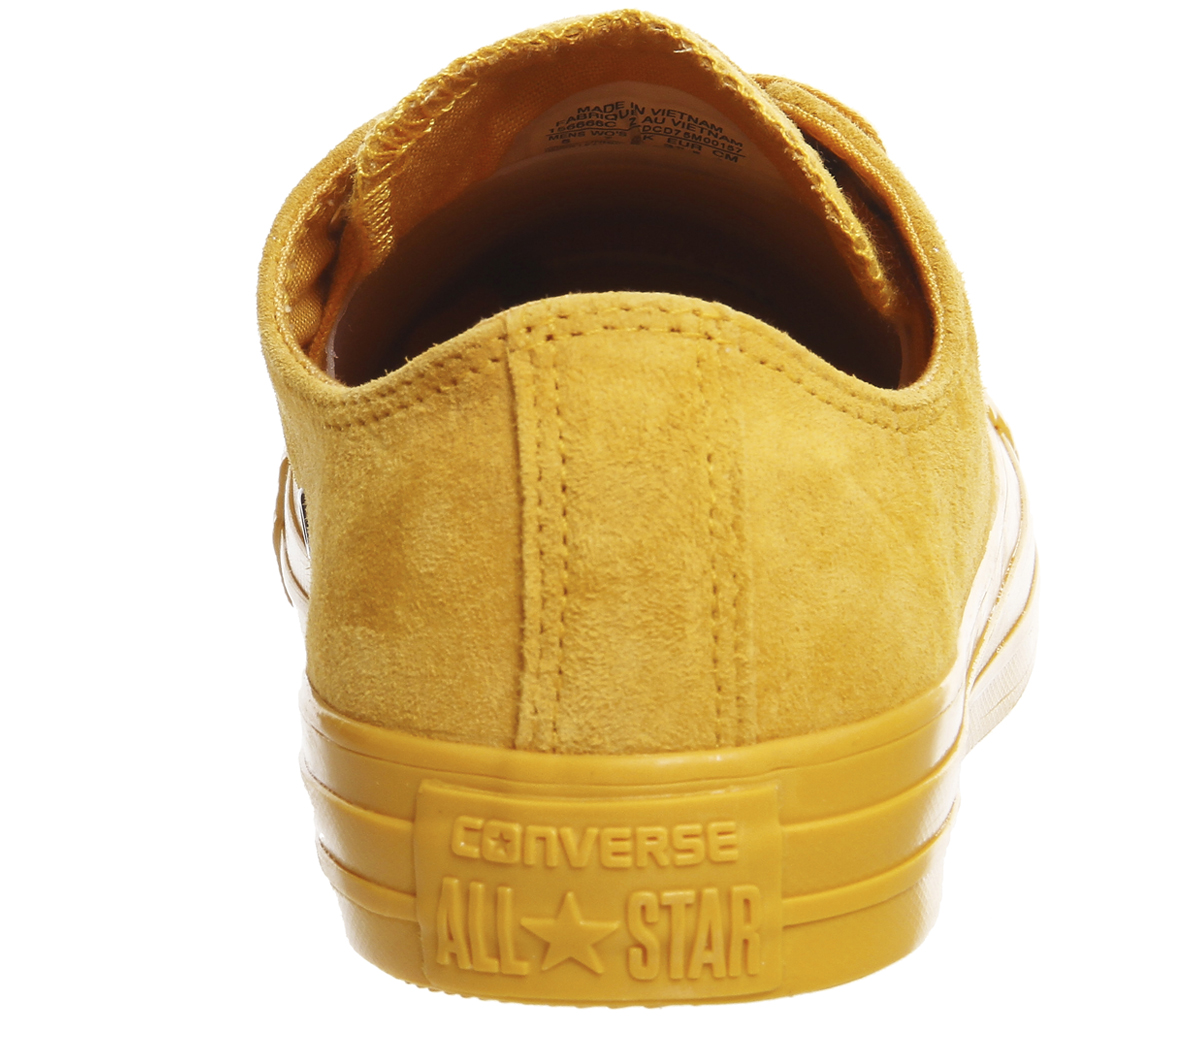 converse all star leather yellow